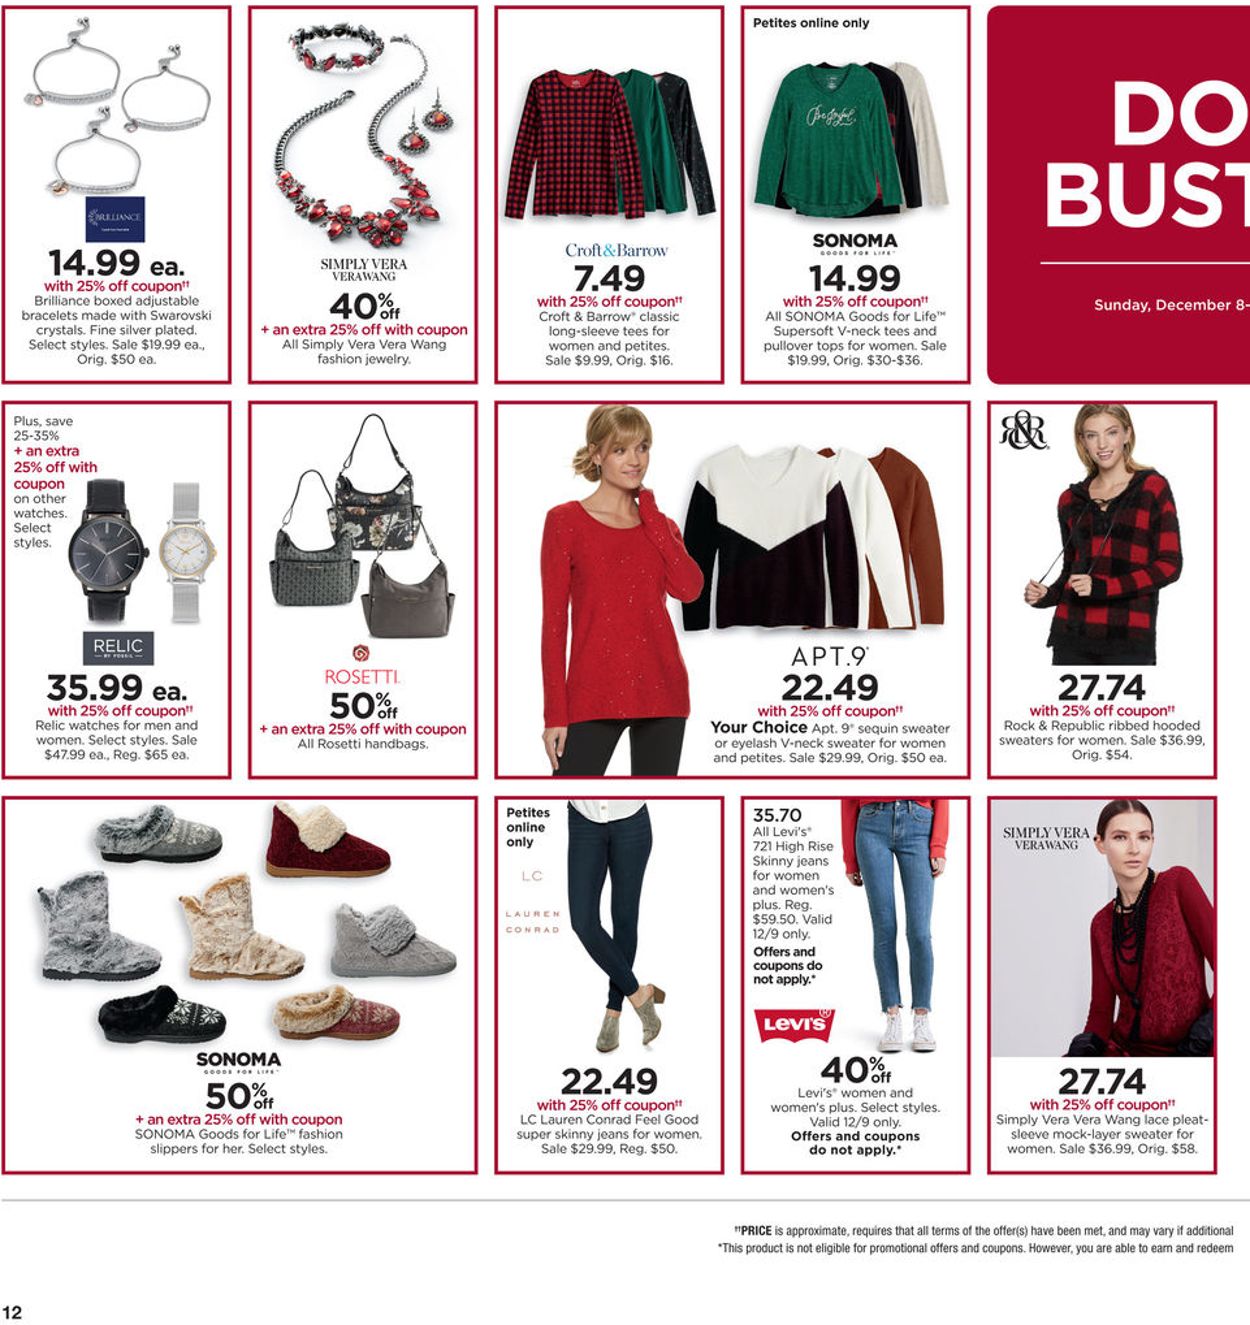 Kohl's Current weekly ad 12/10 - 12/19/2019 [12] - frequent-ads.com